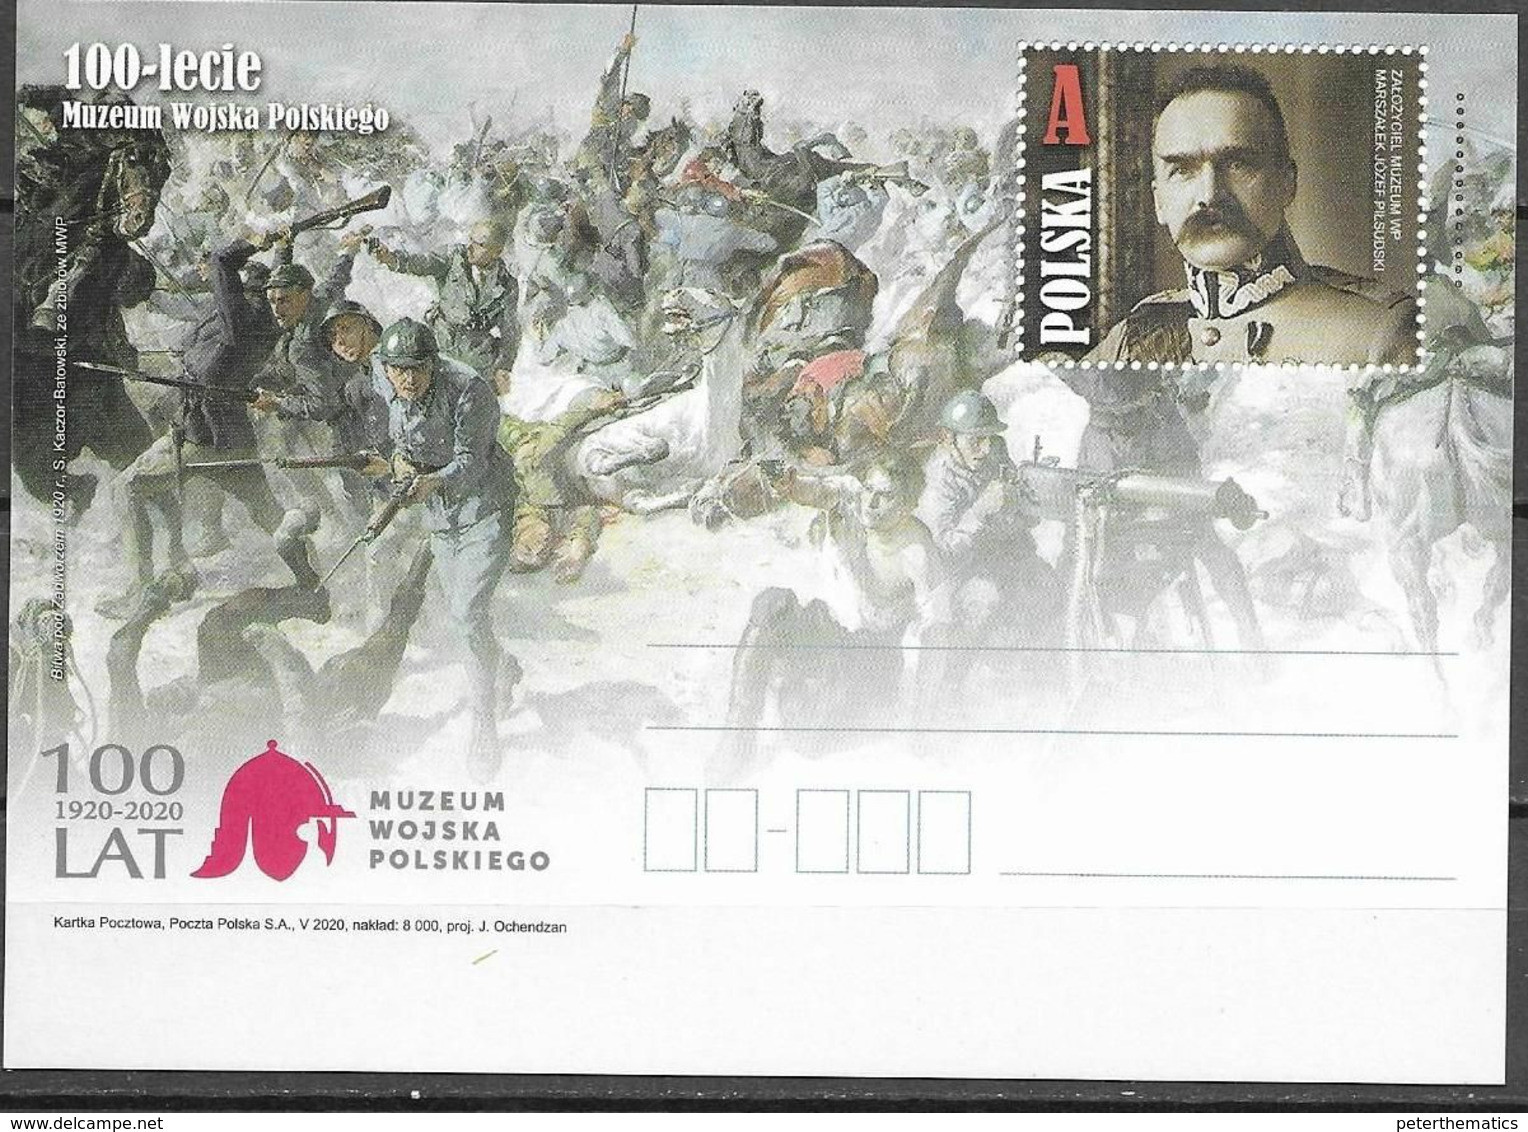 POLAND, 2020, MINT POSTAL STATIONERY, PREPAID POSTCARD, 100 YEARS POLISH ARMY MUSEUM, MILITARY, BATTLES, HORSES - Museums